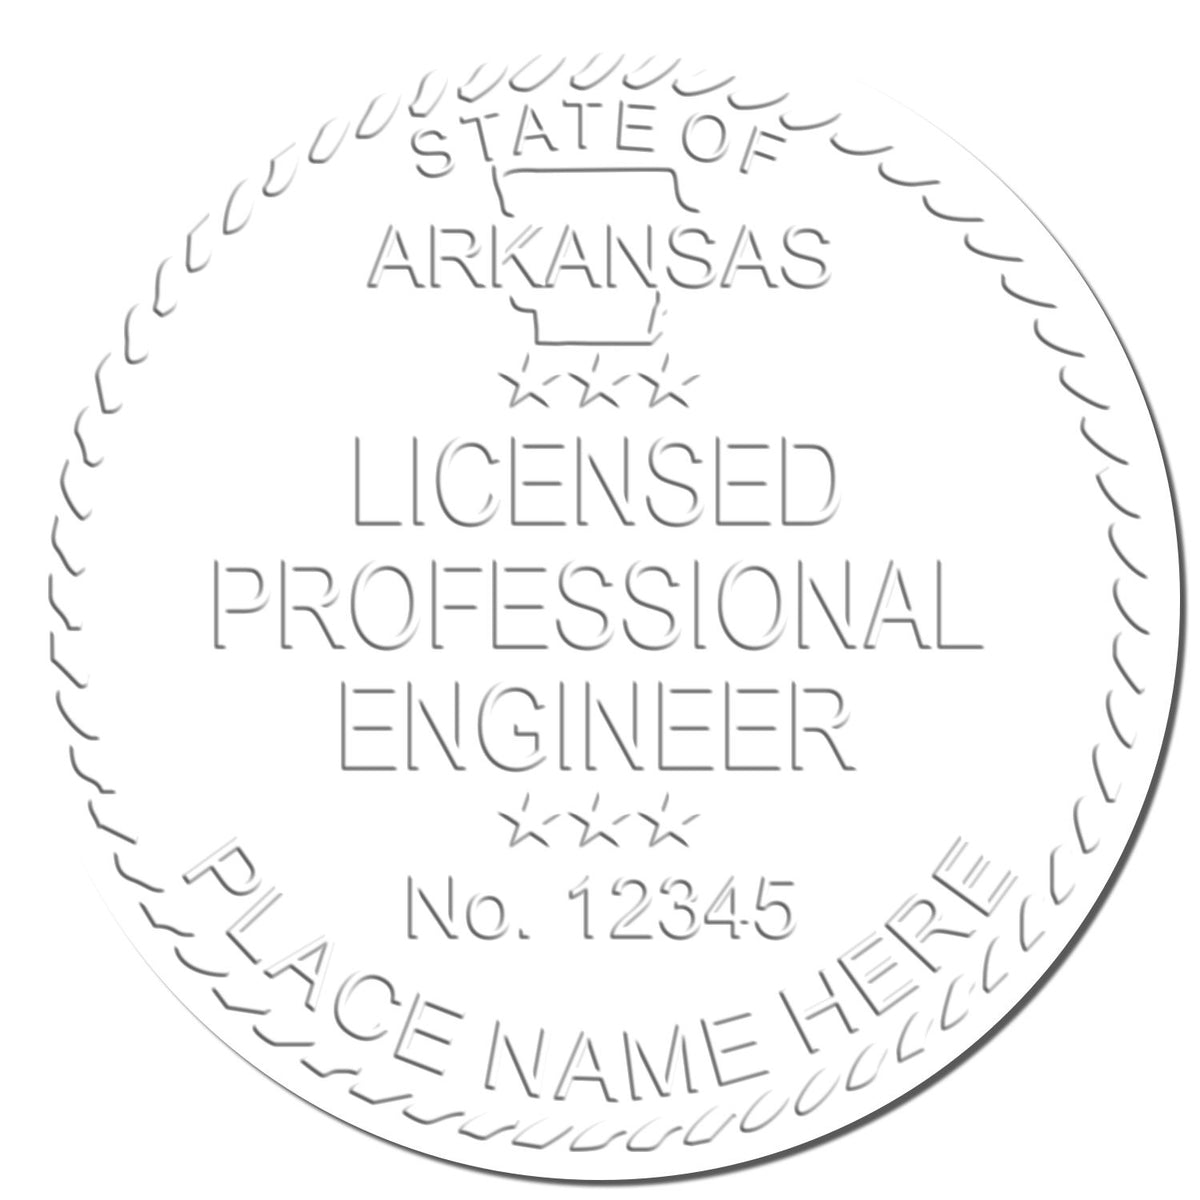 The Long Reach Arkansas PE Seal stamp impression comes to life with a crisp, detailed photo on paper - showcasing true professional quality.